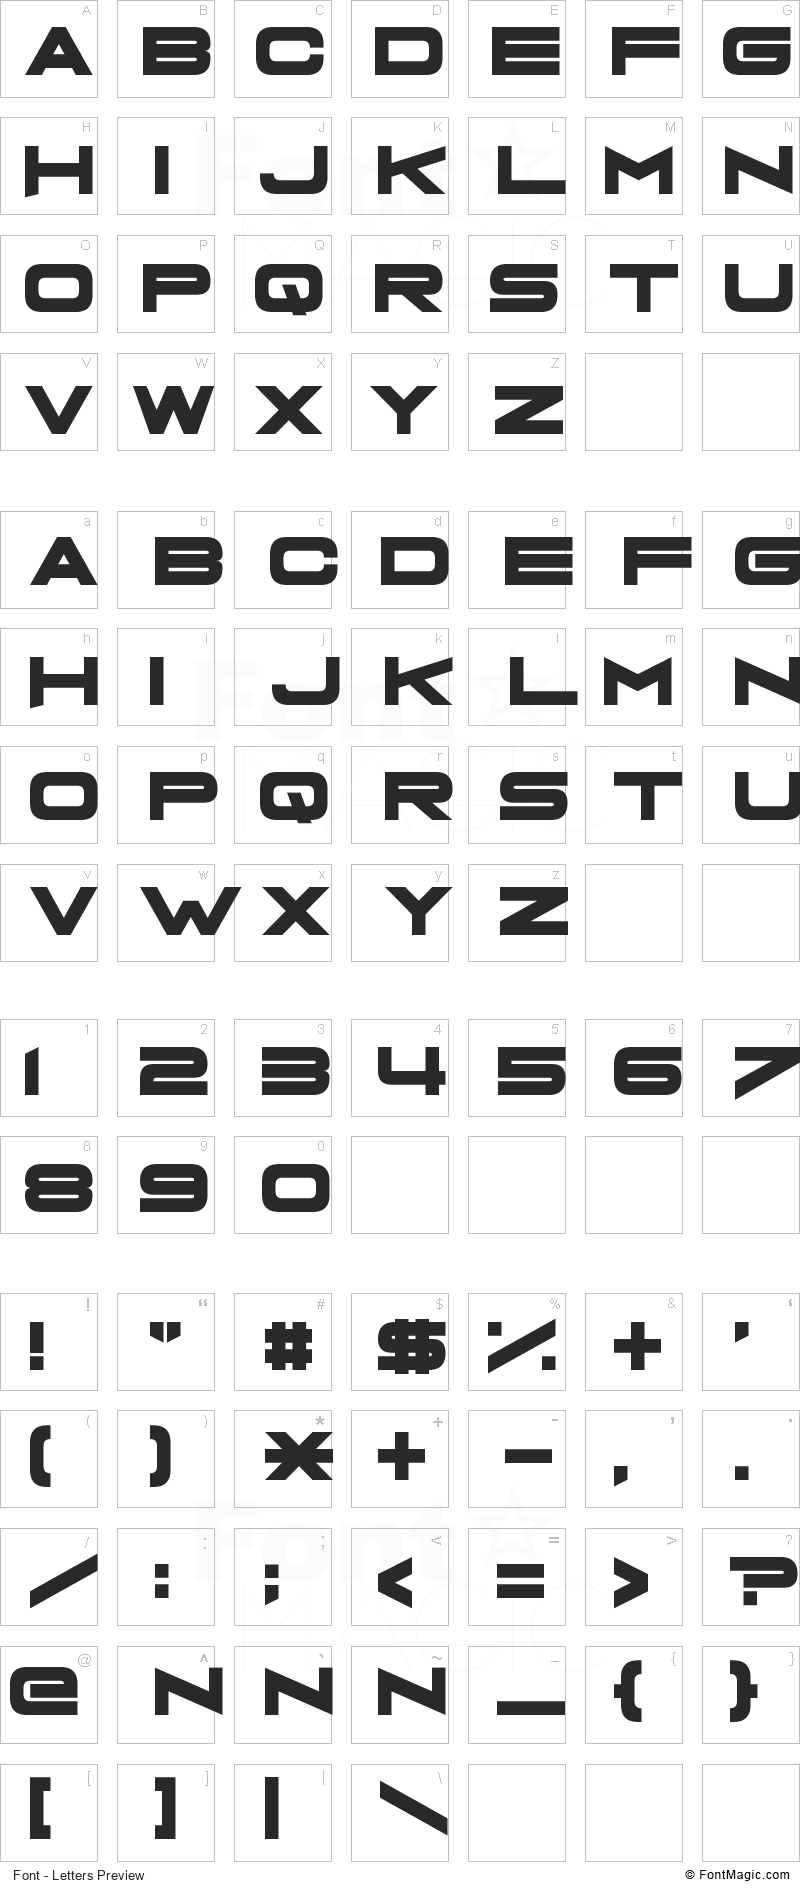 Grandma’s Television Font - All Latters Preview Chart